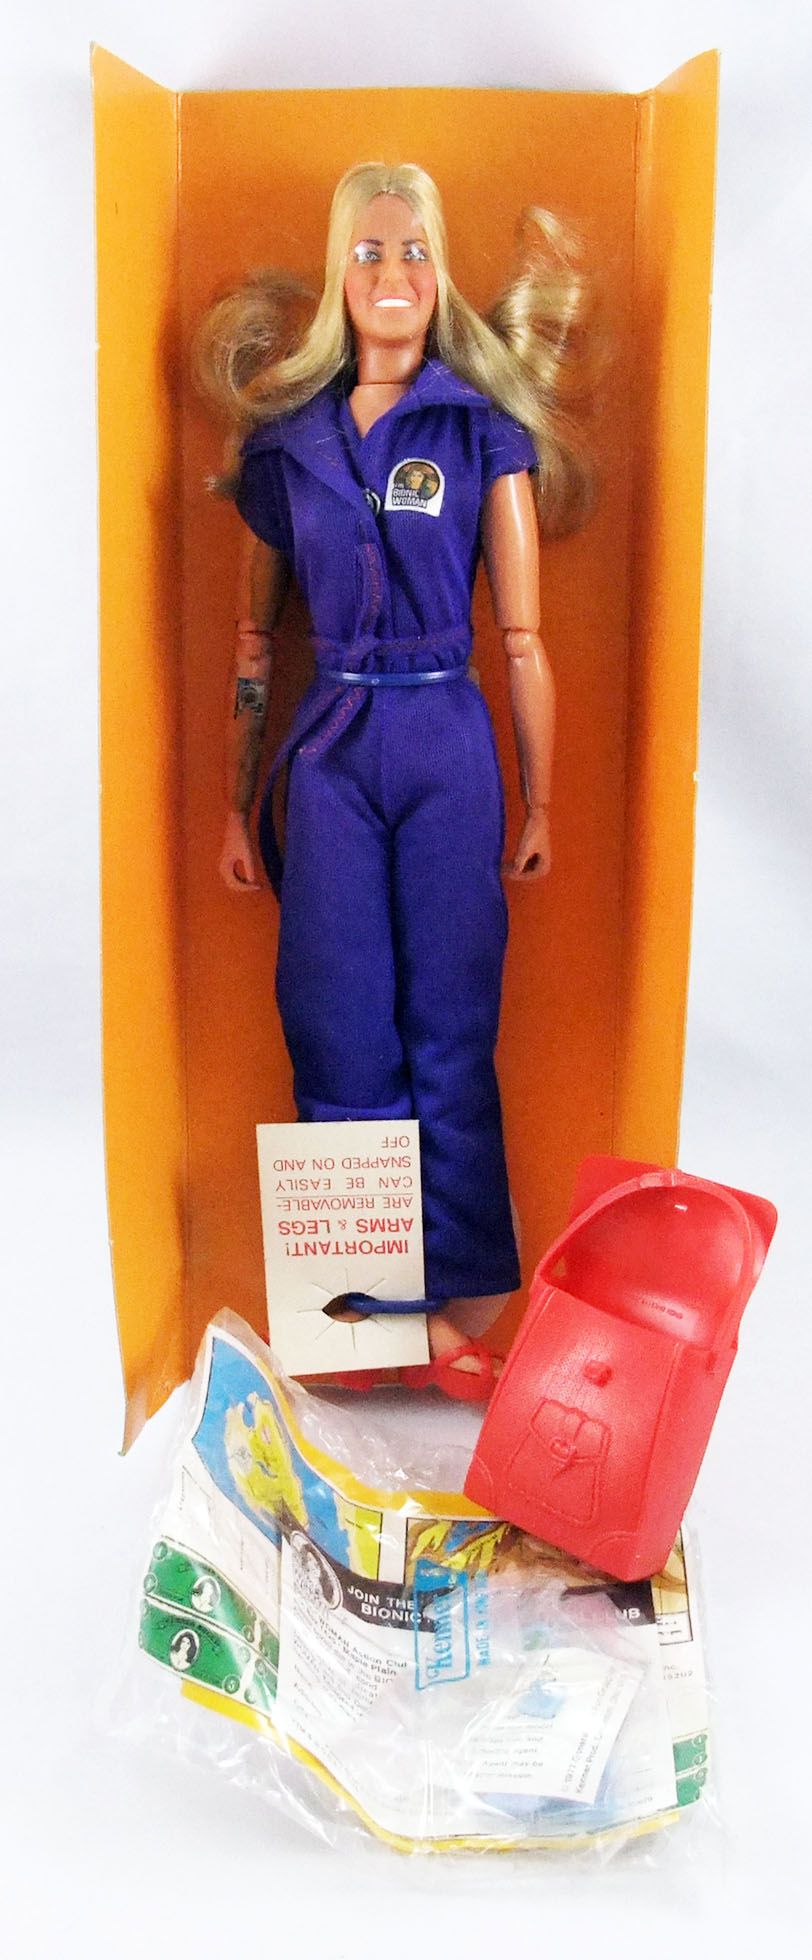 Bionic Woman - 12'' Doll - Jaime Sommers (Mission Purse) - Denys  Fisher/Meccano box